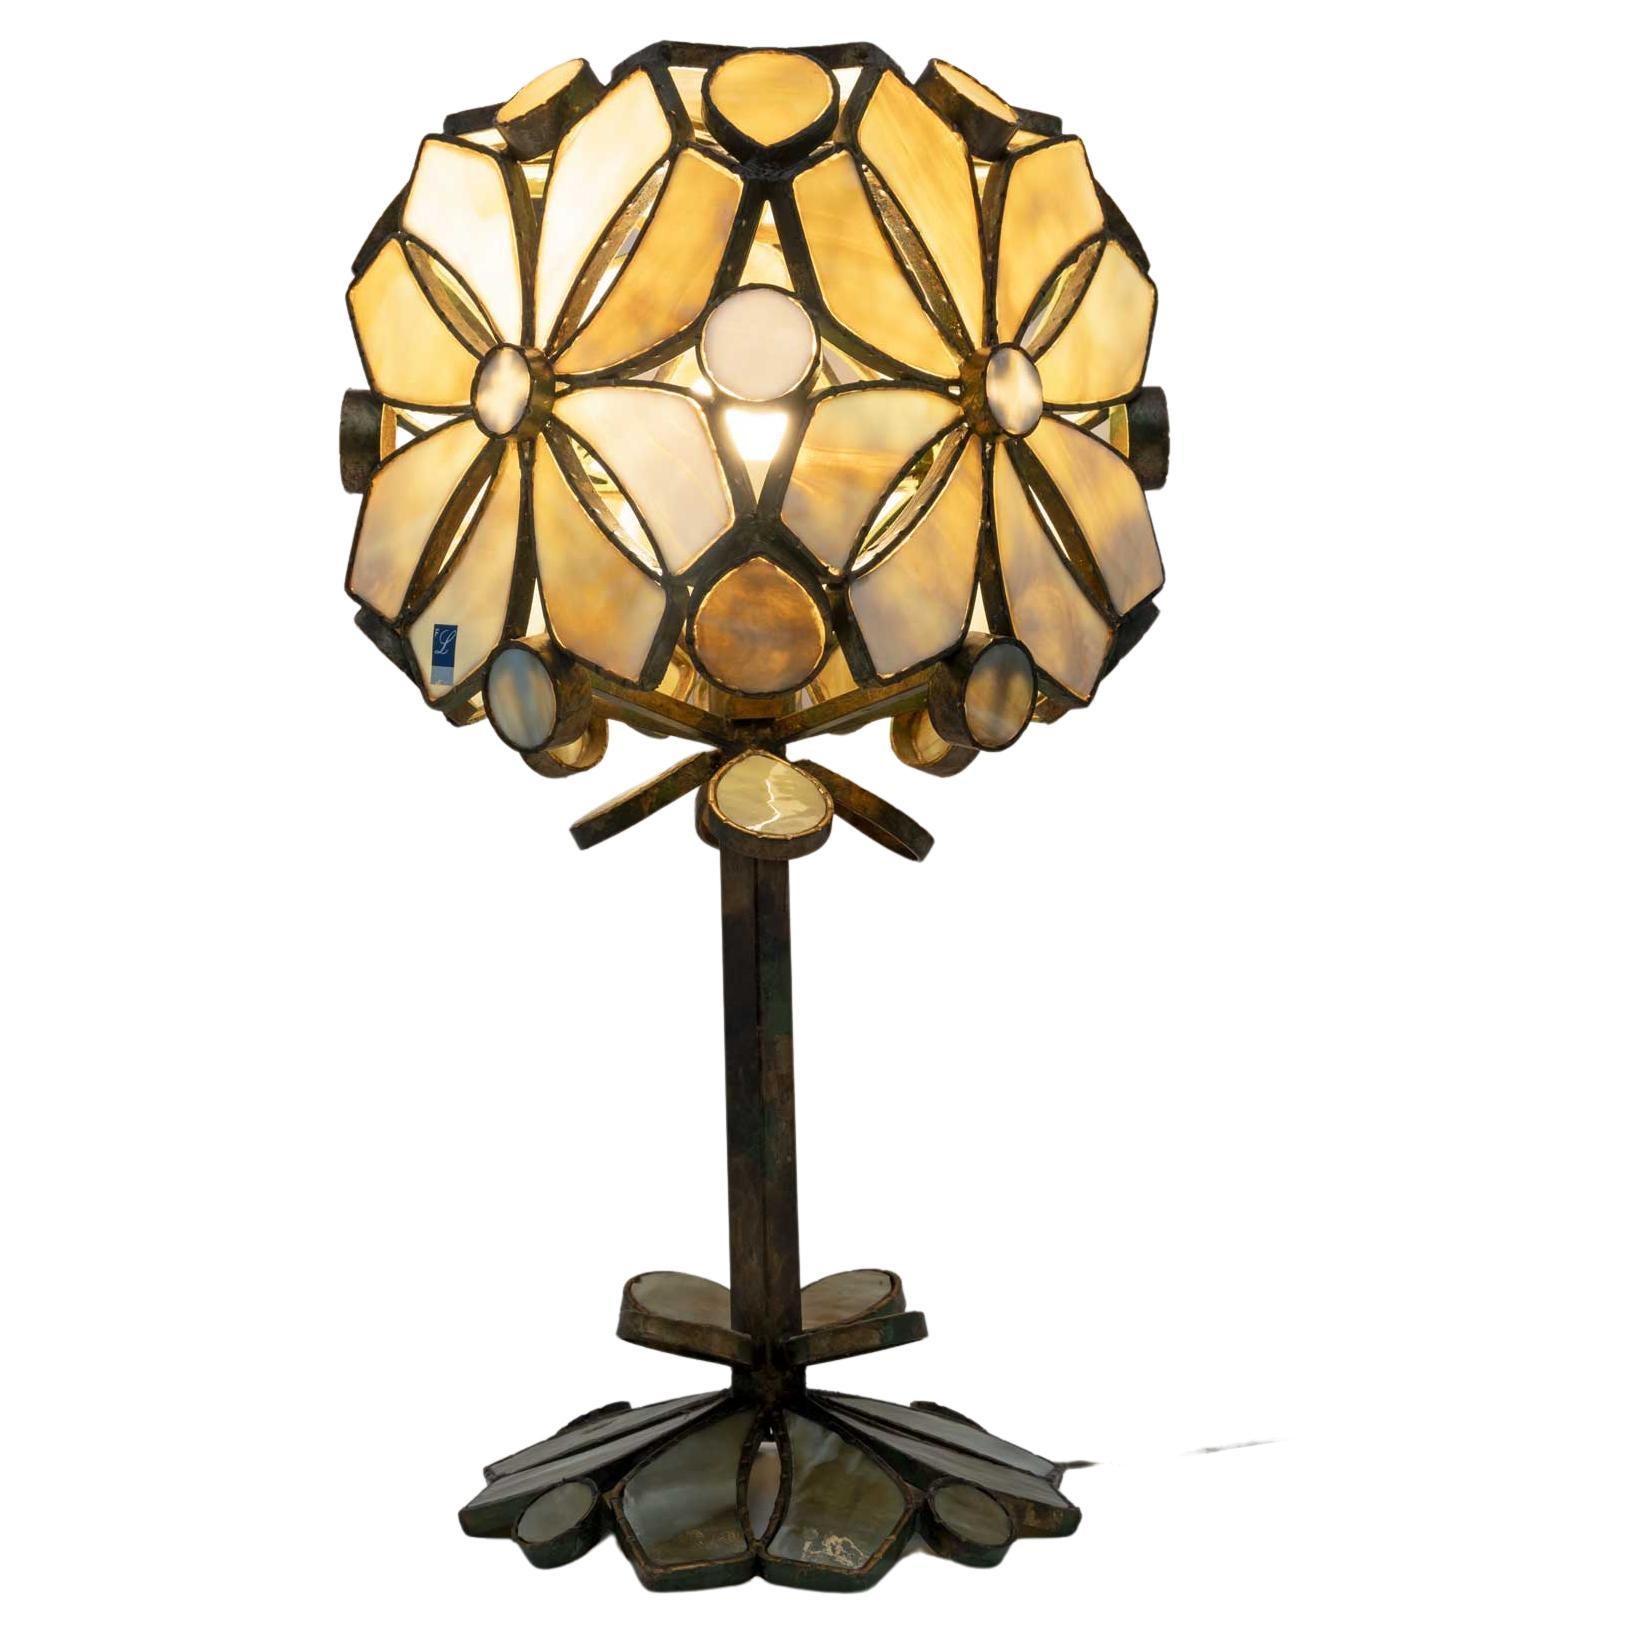 Rare Brutalist Italian Glass Paste and Wrought Iron Table Lamp by Longobard, 70s For Sale